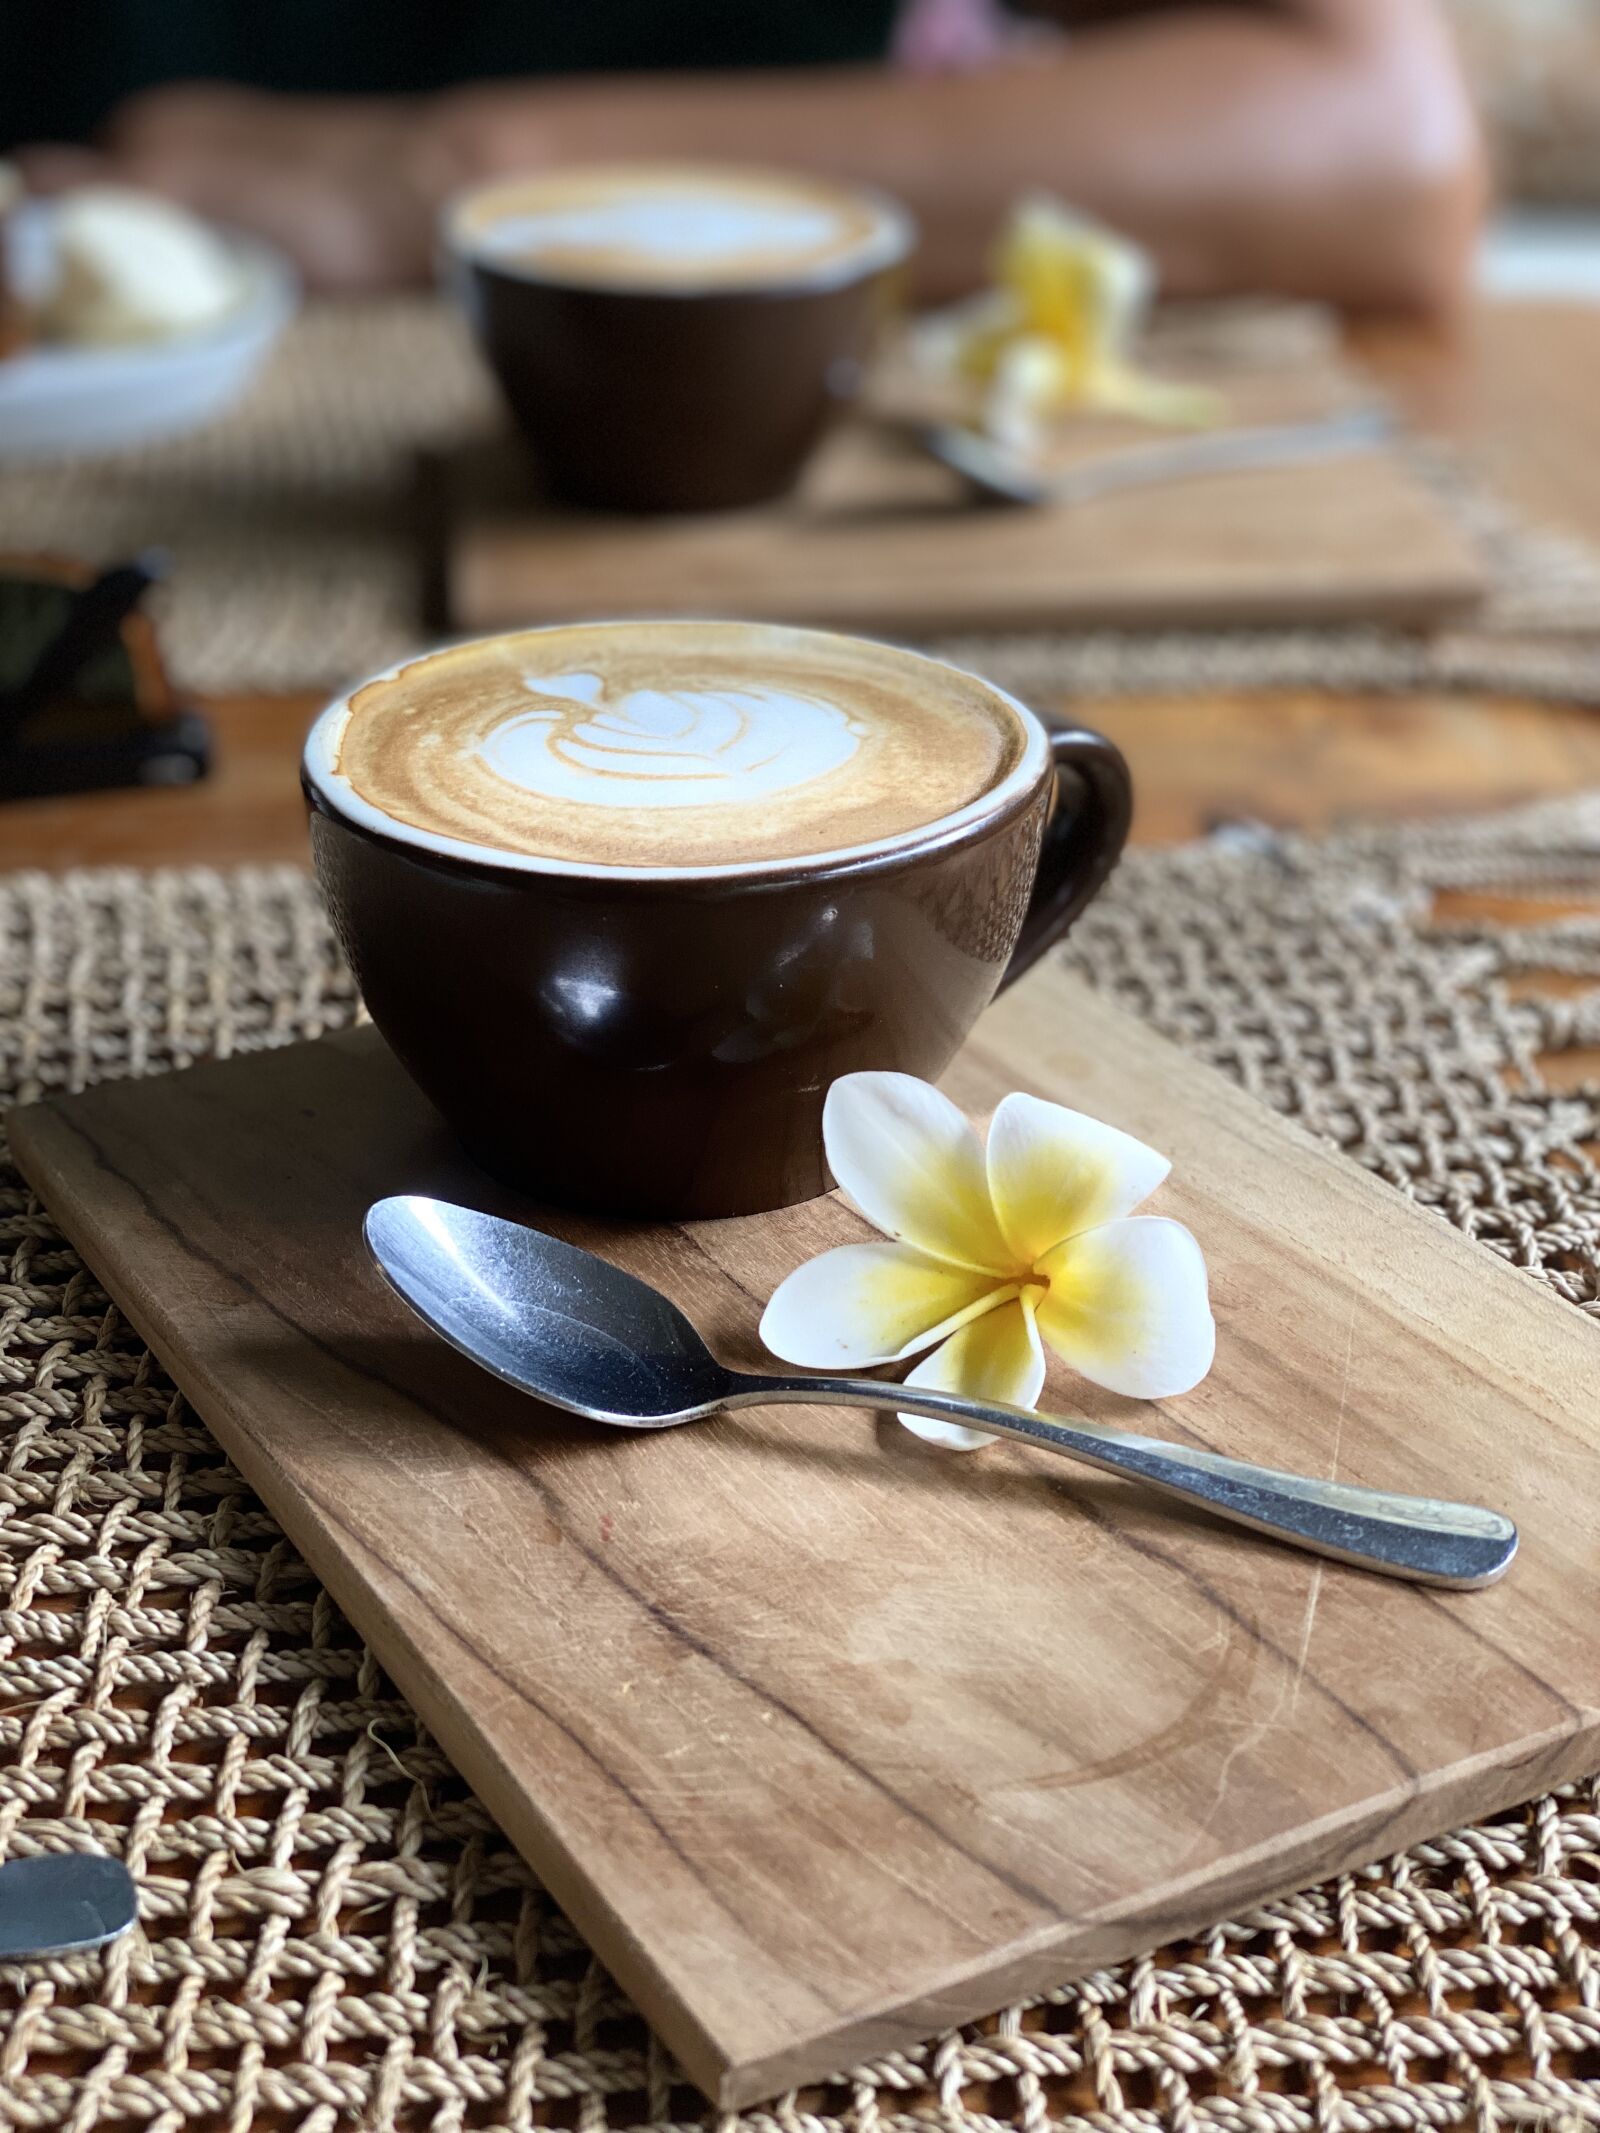 Apple iPhone 11 Pro Max sample photo. Cappuccino, coffee, flower photography